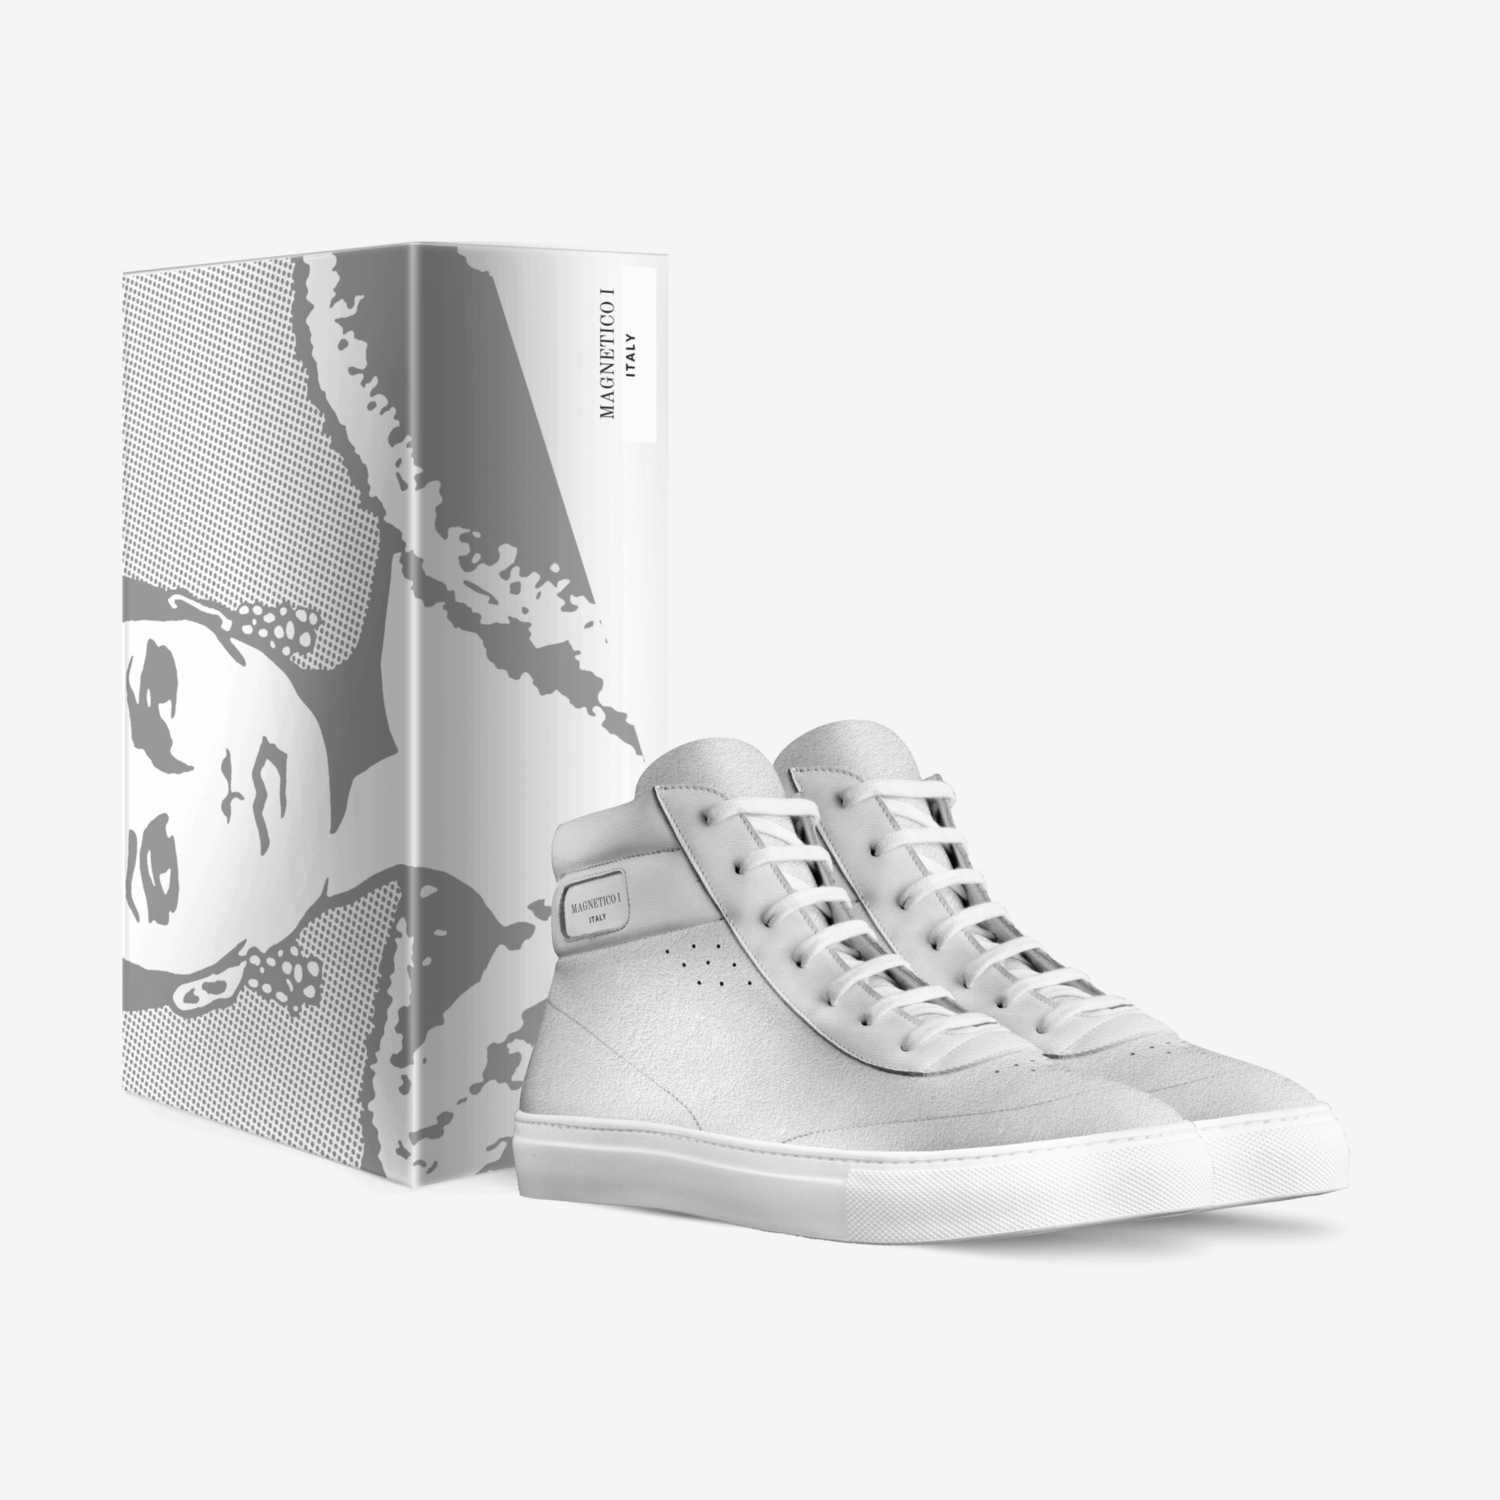 MAGNETICO I IVORY custom made in Italy shoes by Jesús Sandoval | Box view